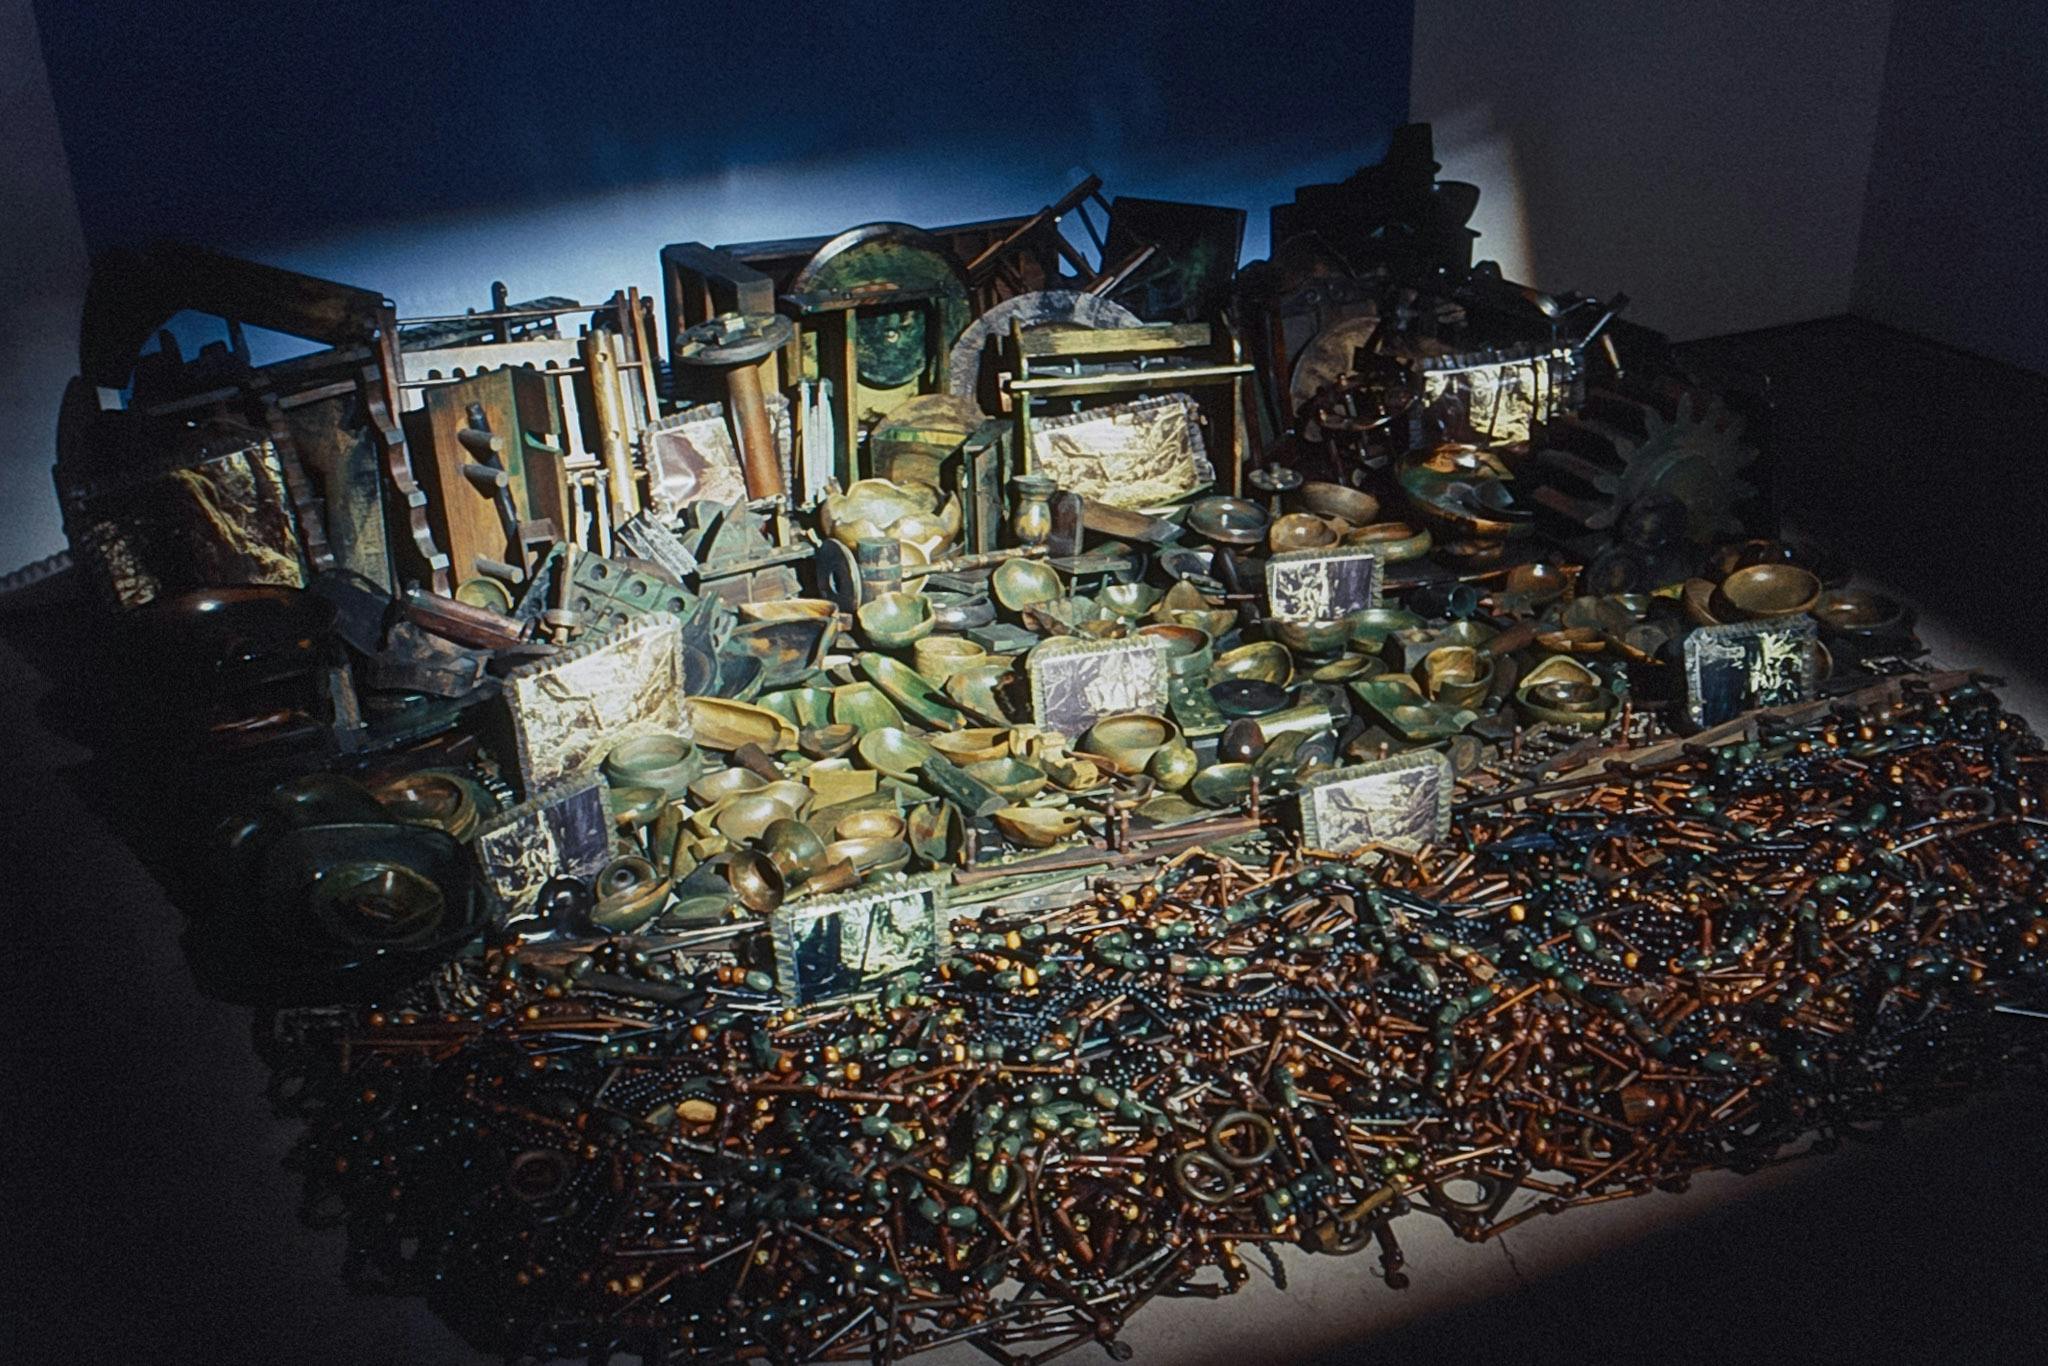 A closeup of an artwork at the base of a wall. The work is composed of hundreds of discarded objects, including framed photos, ceramic and wooden bowls, beads, industrial gears, and wall shelves.